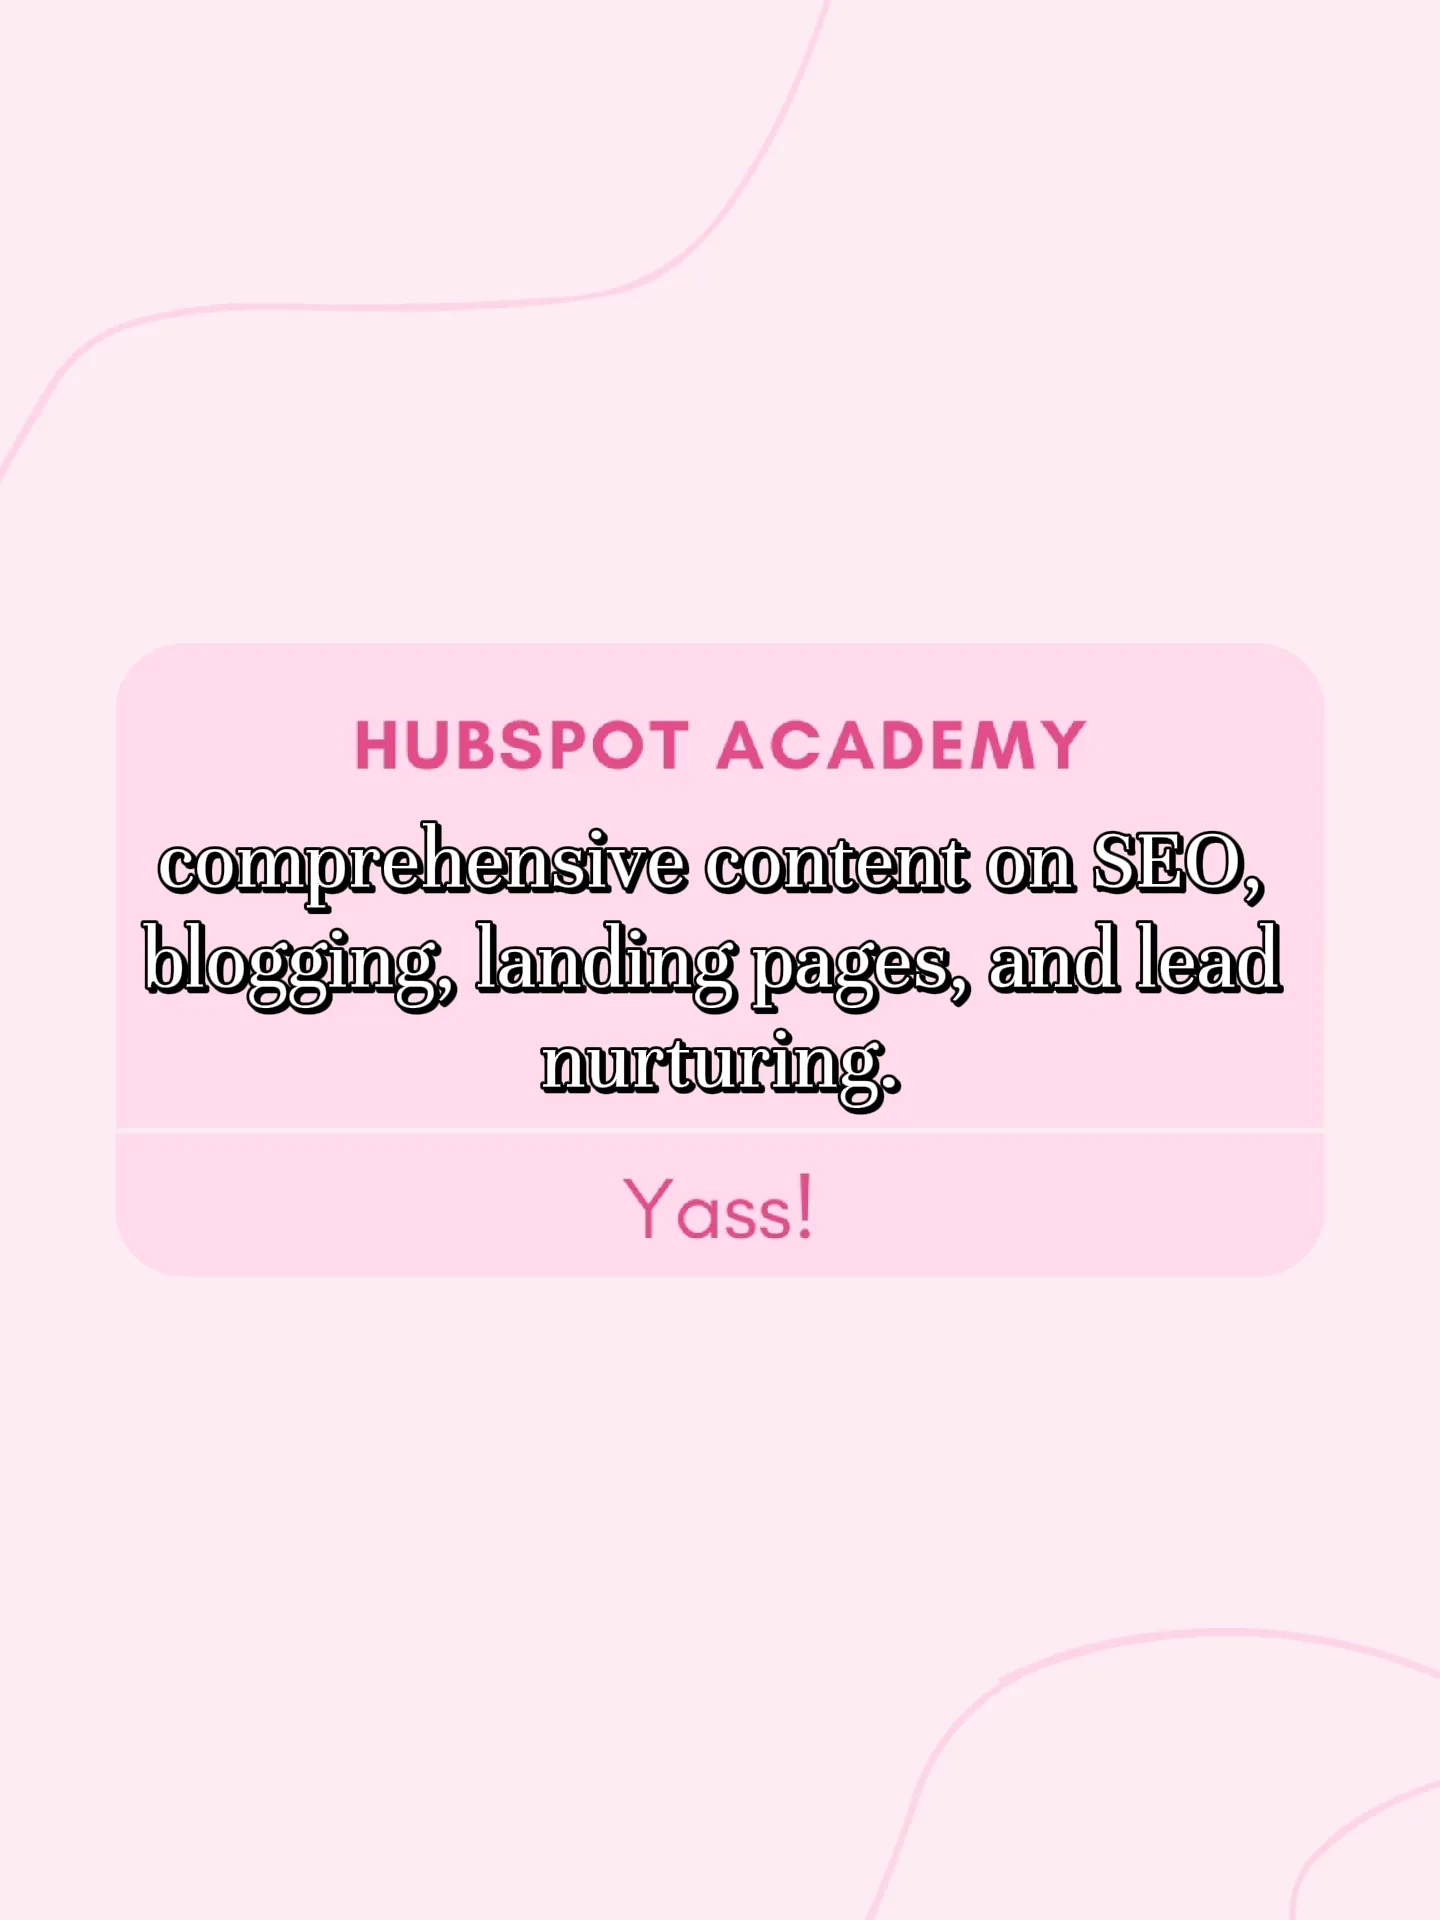  A white background with a pink logo for the Hubspot Academy.